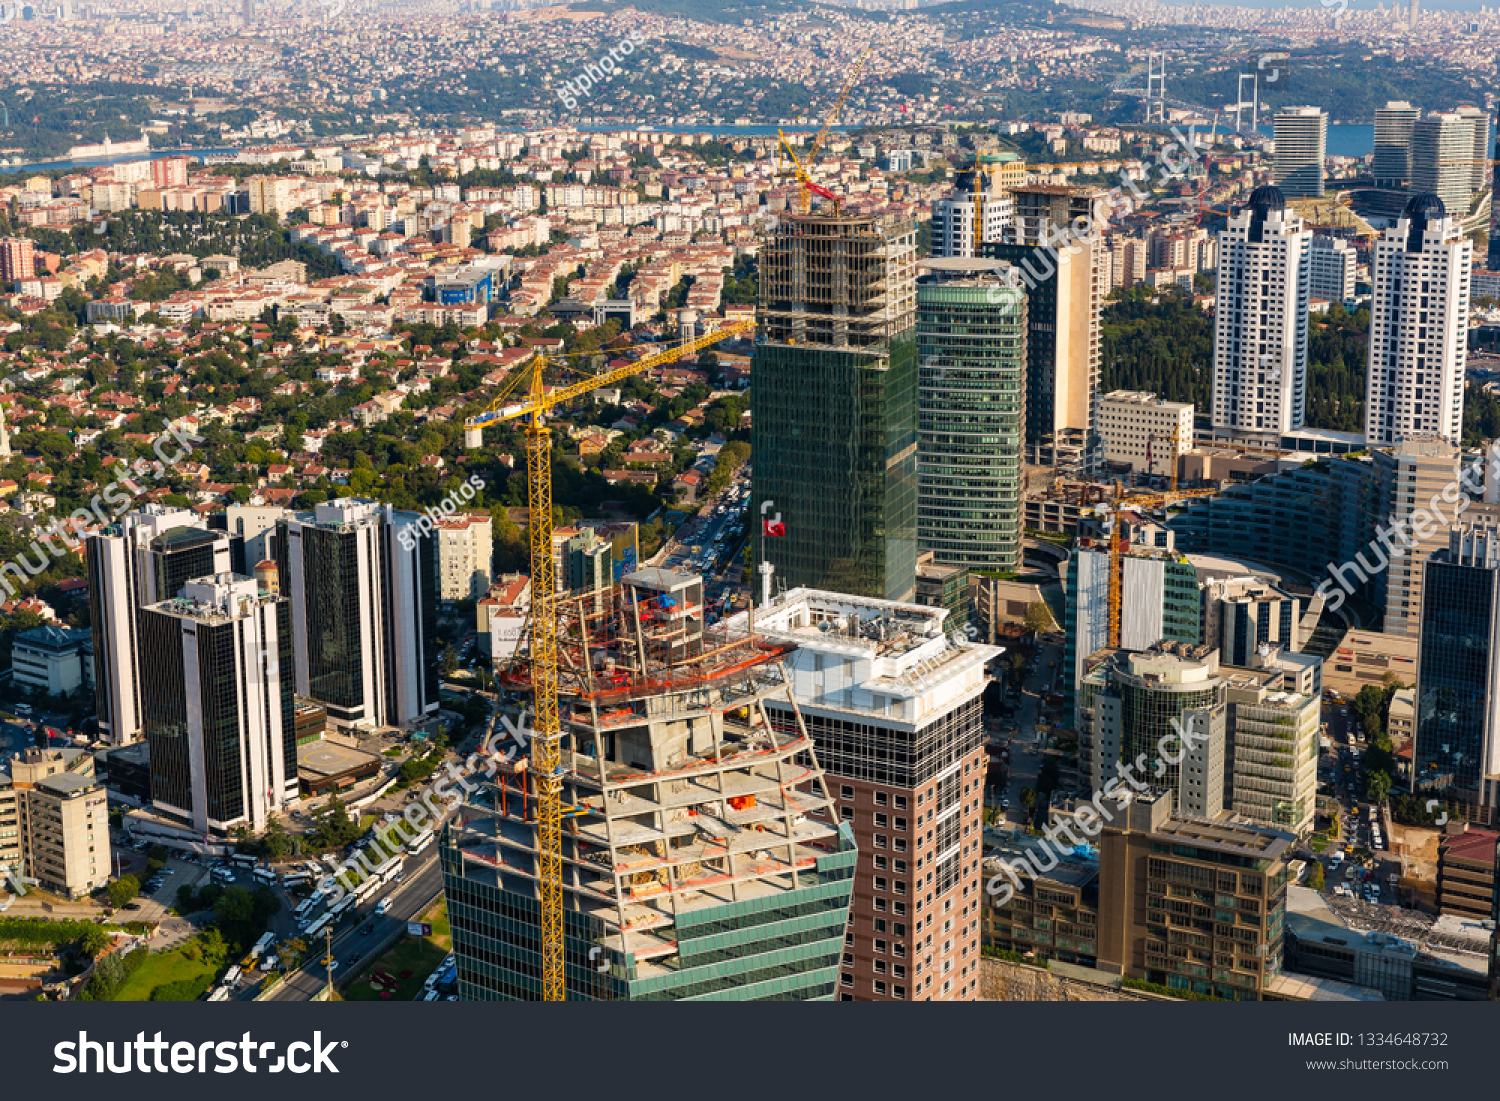 Robust construction sector in Istanbul, many skyscrapers being built #1334648732